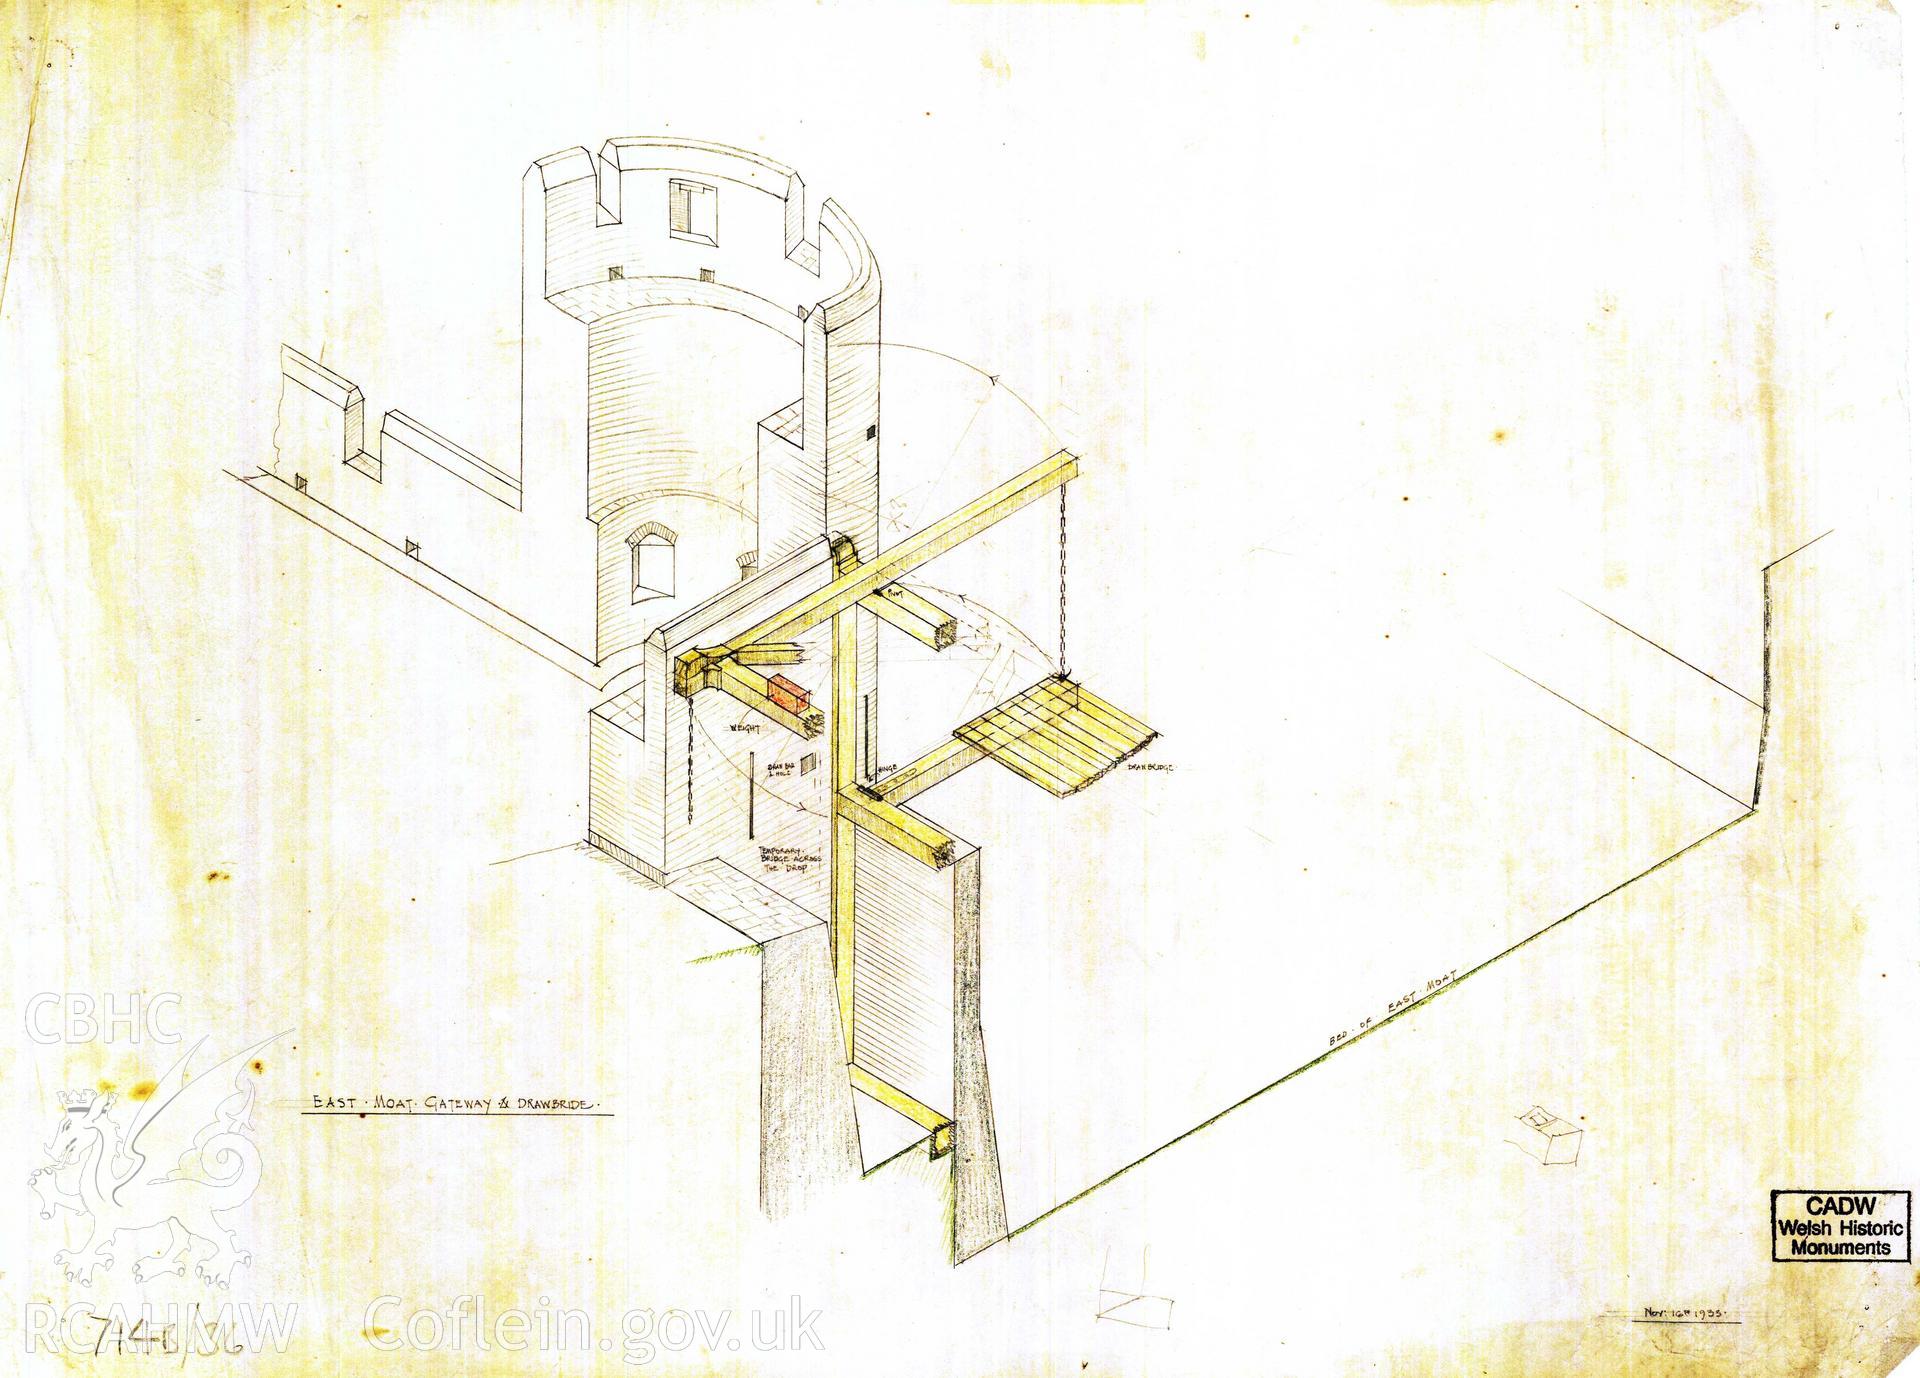 Digital copy of Cadw guardianship monument drawing of Caerphilly Castle. Mid E gate, isom view, cutaway. Cadw ref. no: 714B/36. Unknown scale.  Original drawing withdrawn and returned to Cadw at their request.